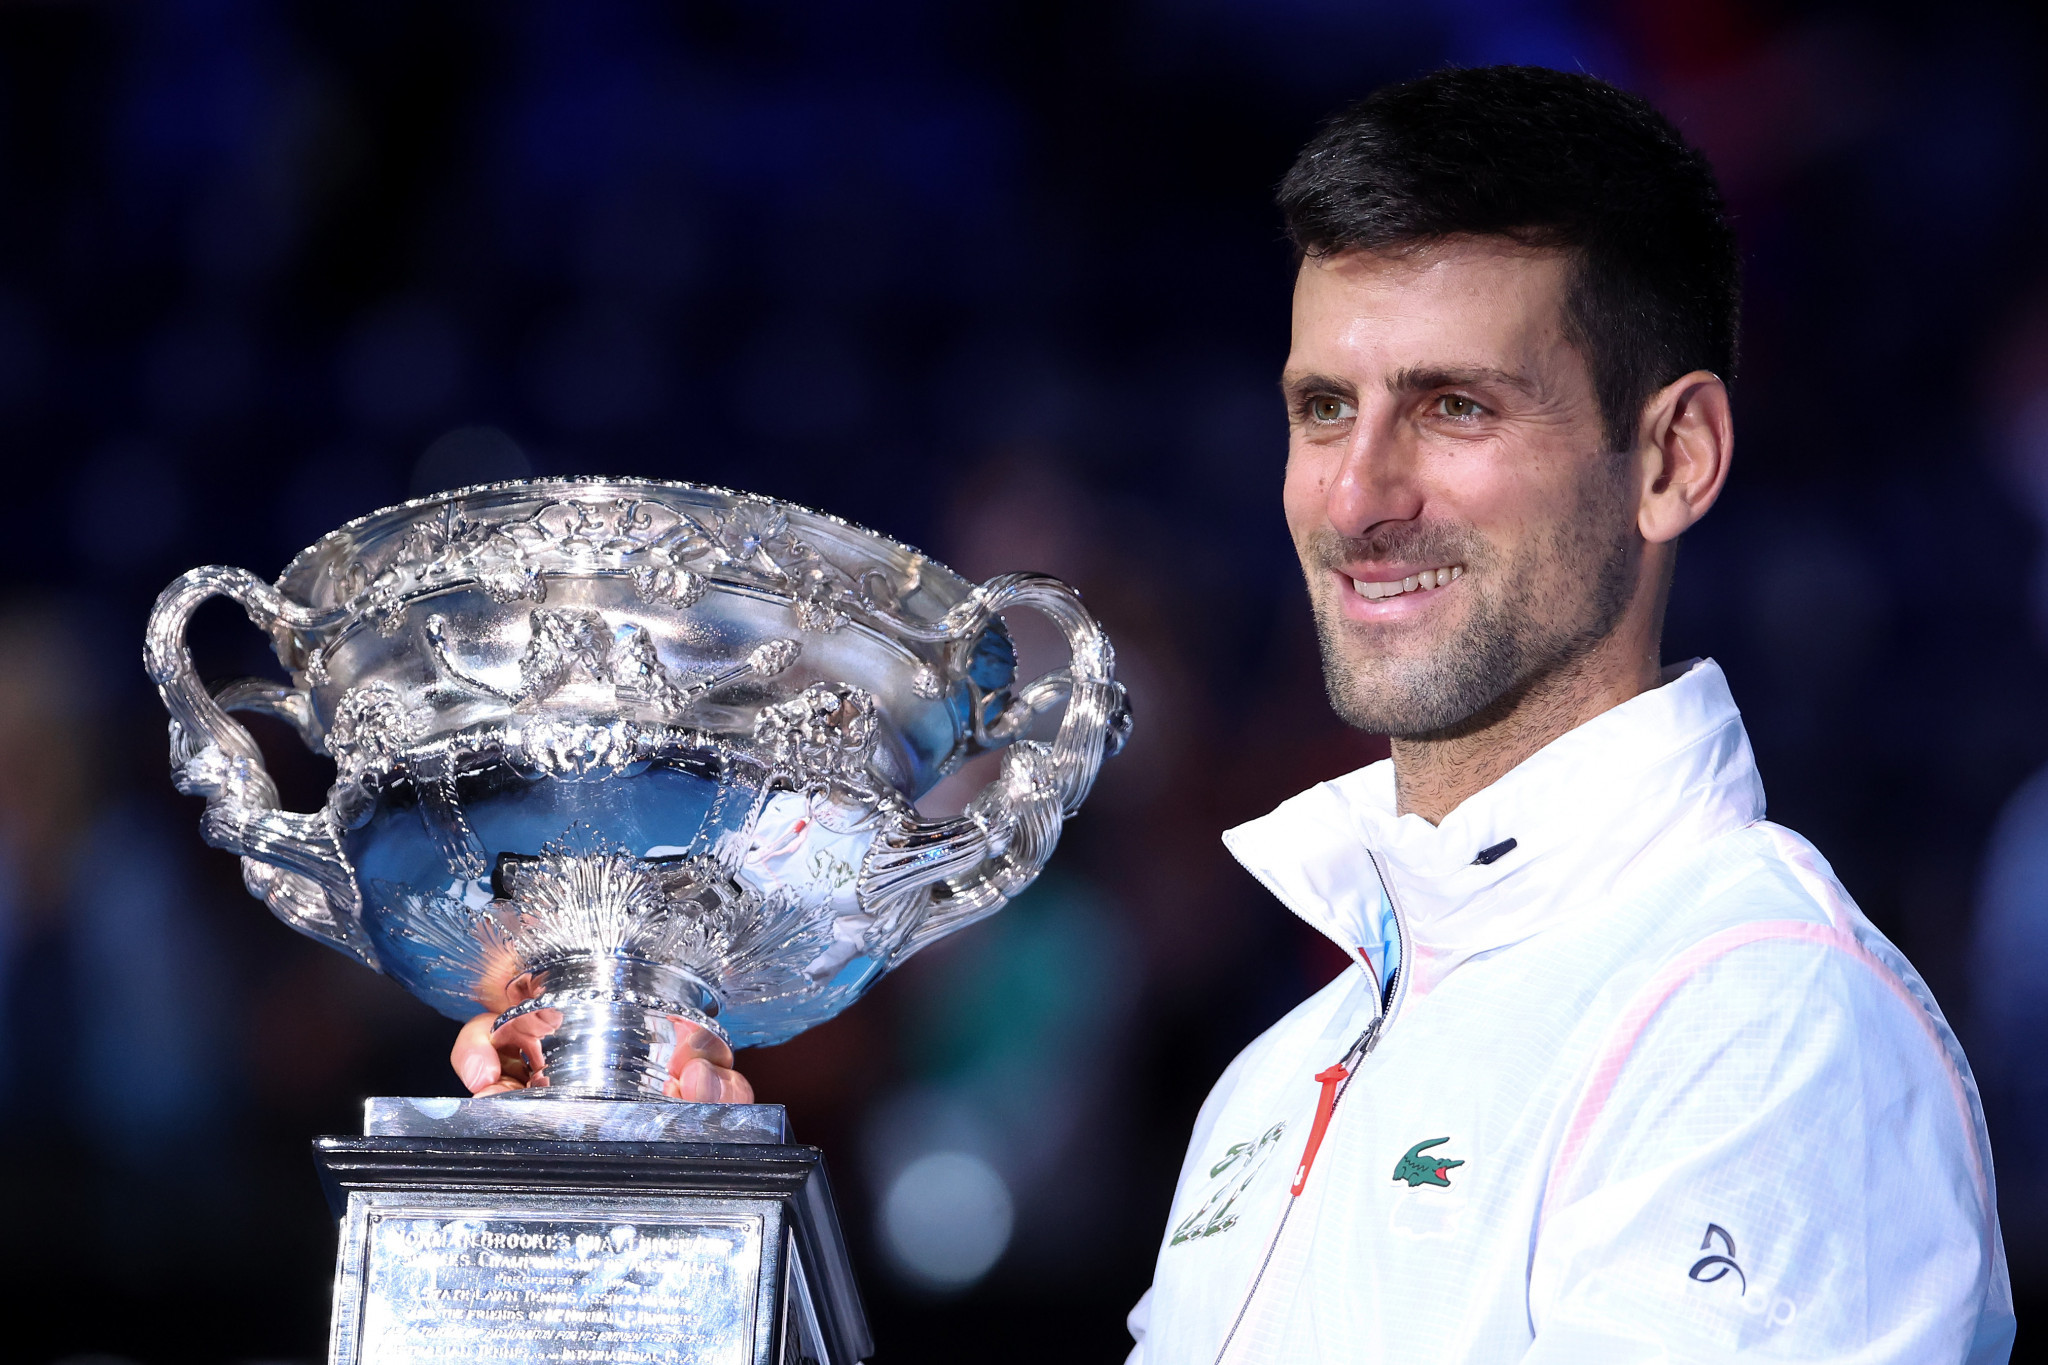 Novak Djokovic claimed a tenth Australian Open men's singles title, and a 22nd Grand Slam title overall, after a straight sets win over Stefanos Tsitsipas in Melbourne ©Getty Images